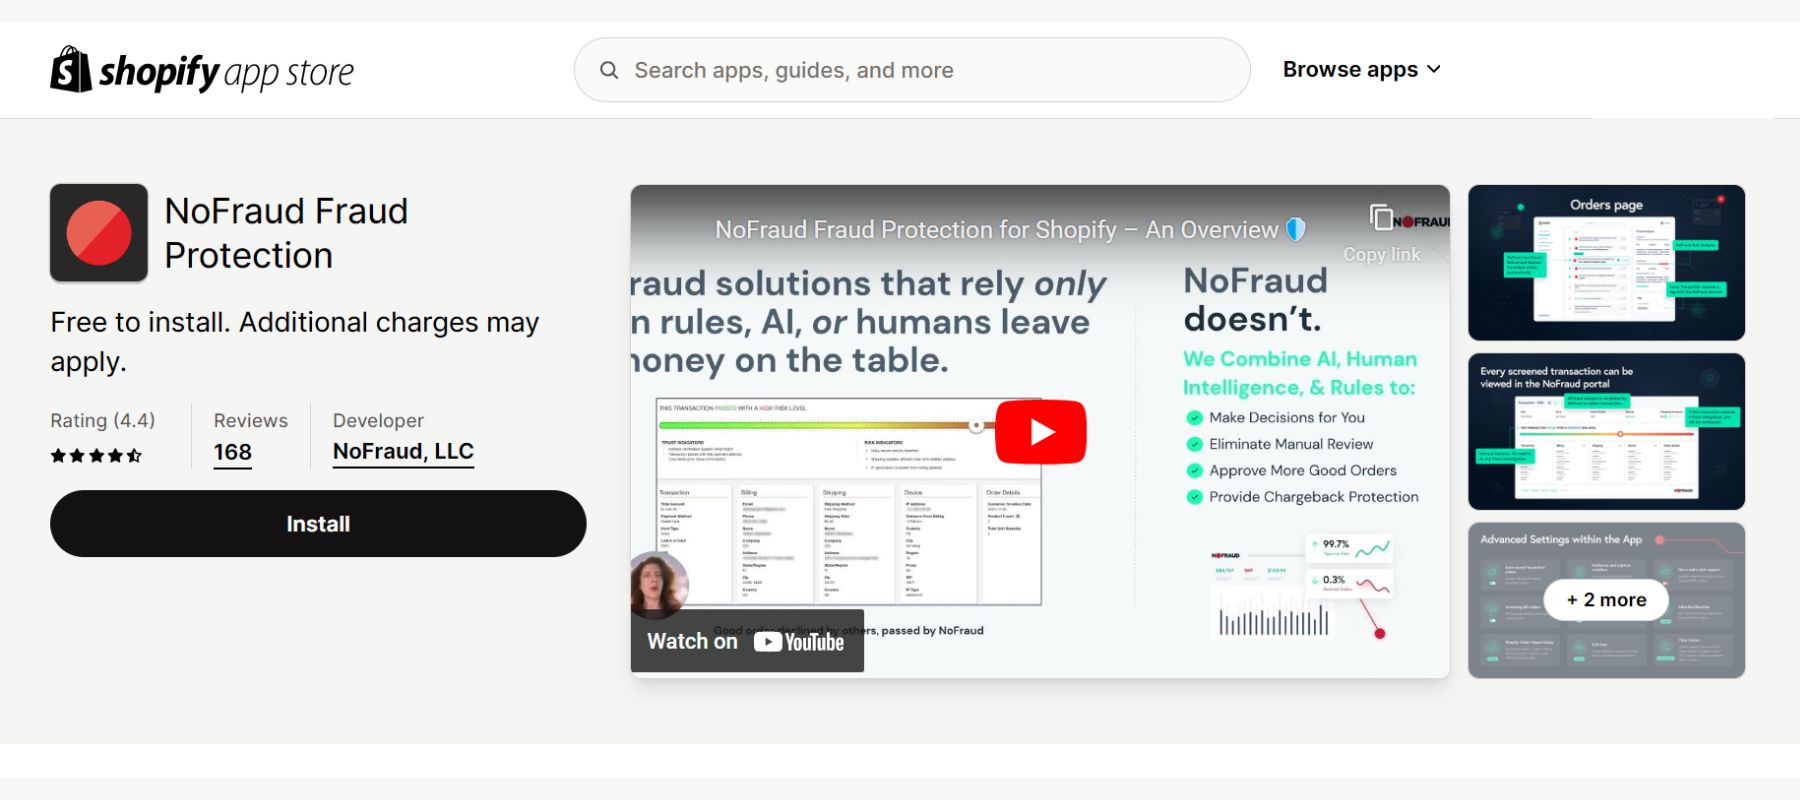 NoFraud Fraud Protection on Shopify App Store